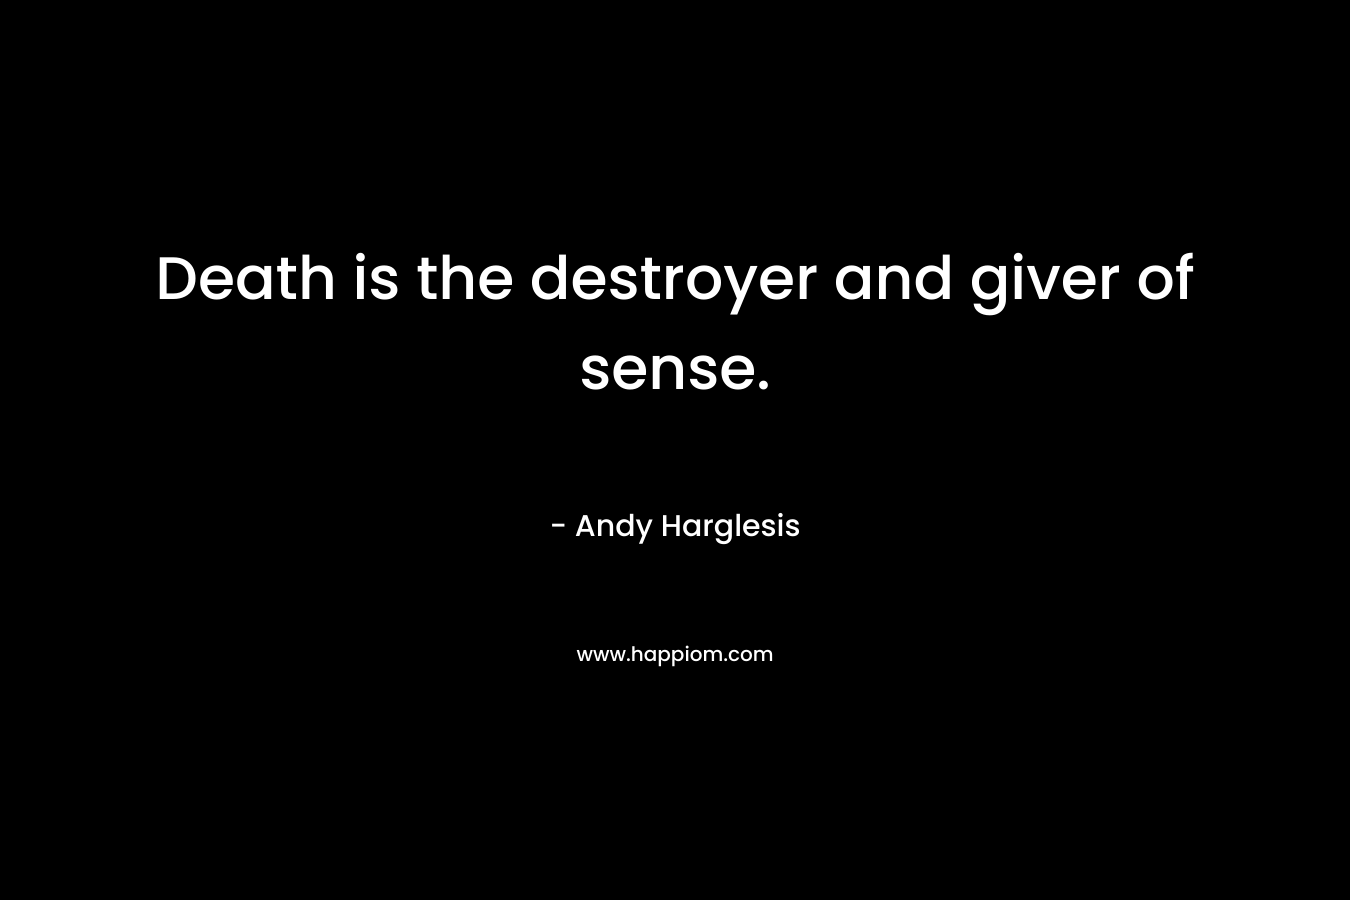 Death is the destroyer and giver of sense. – Andy Harglesis